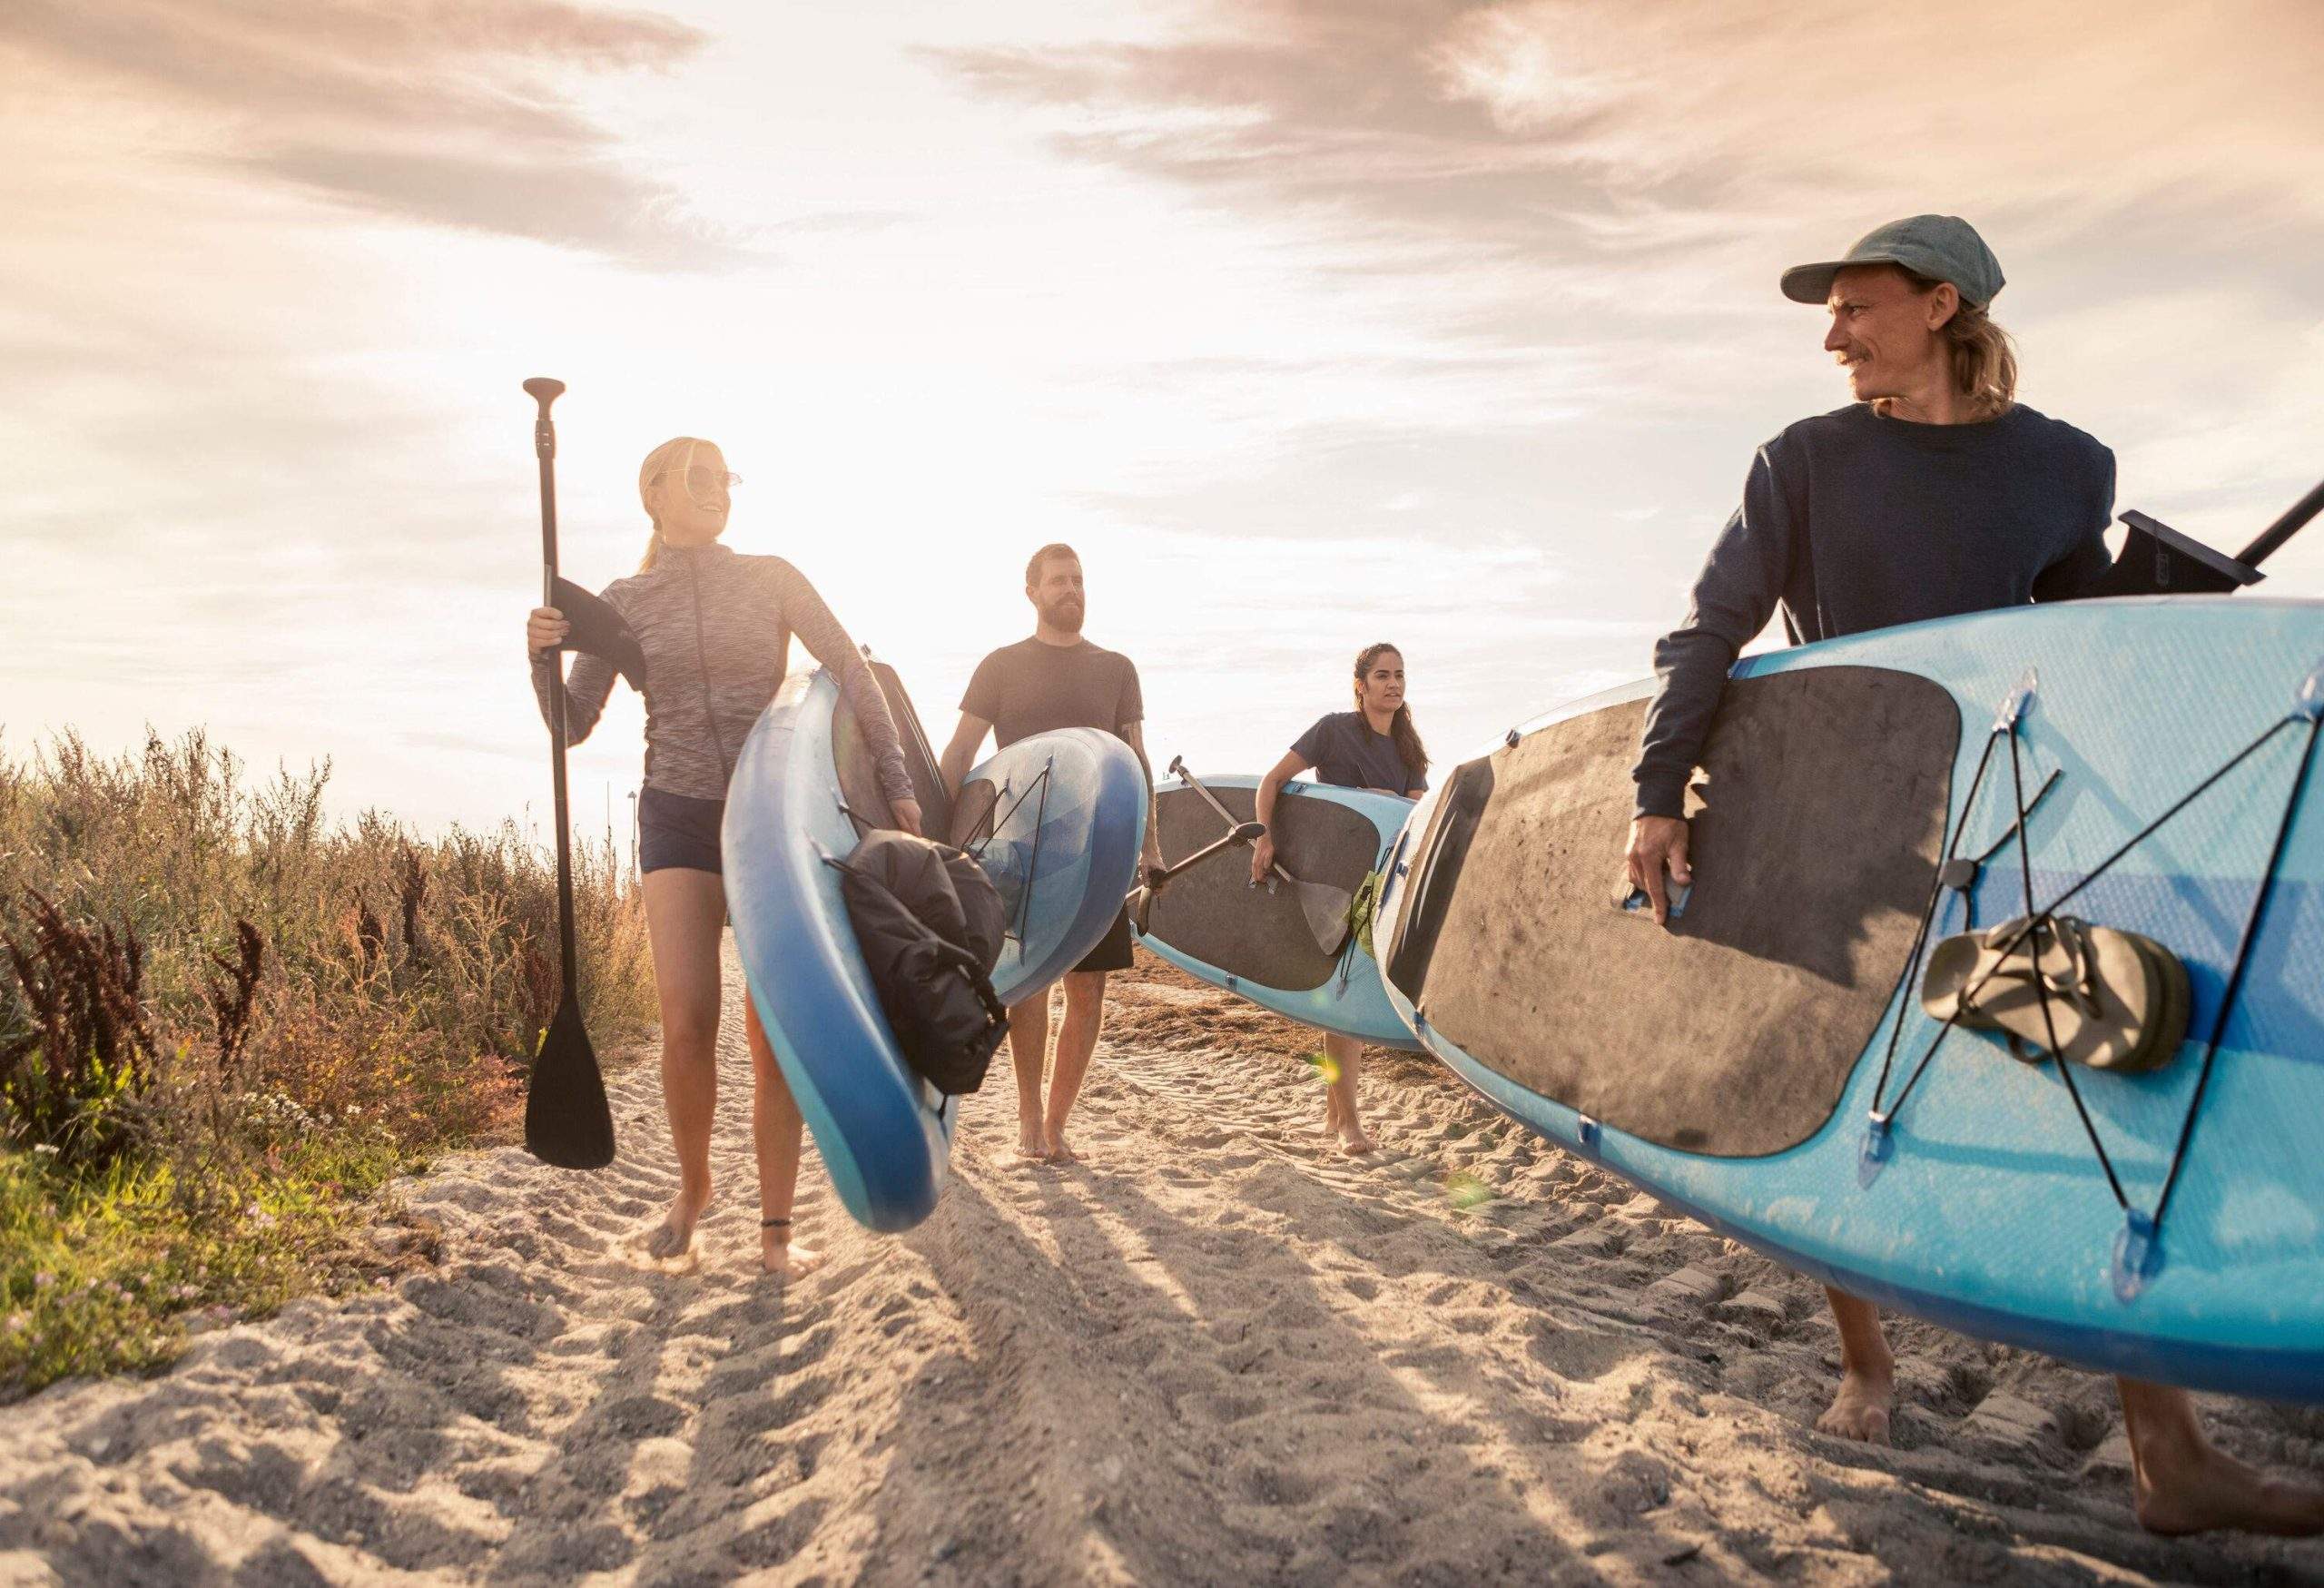 A group of four friends carries their large boards and paddles, walking along bushy sand on a sunny day.